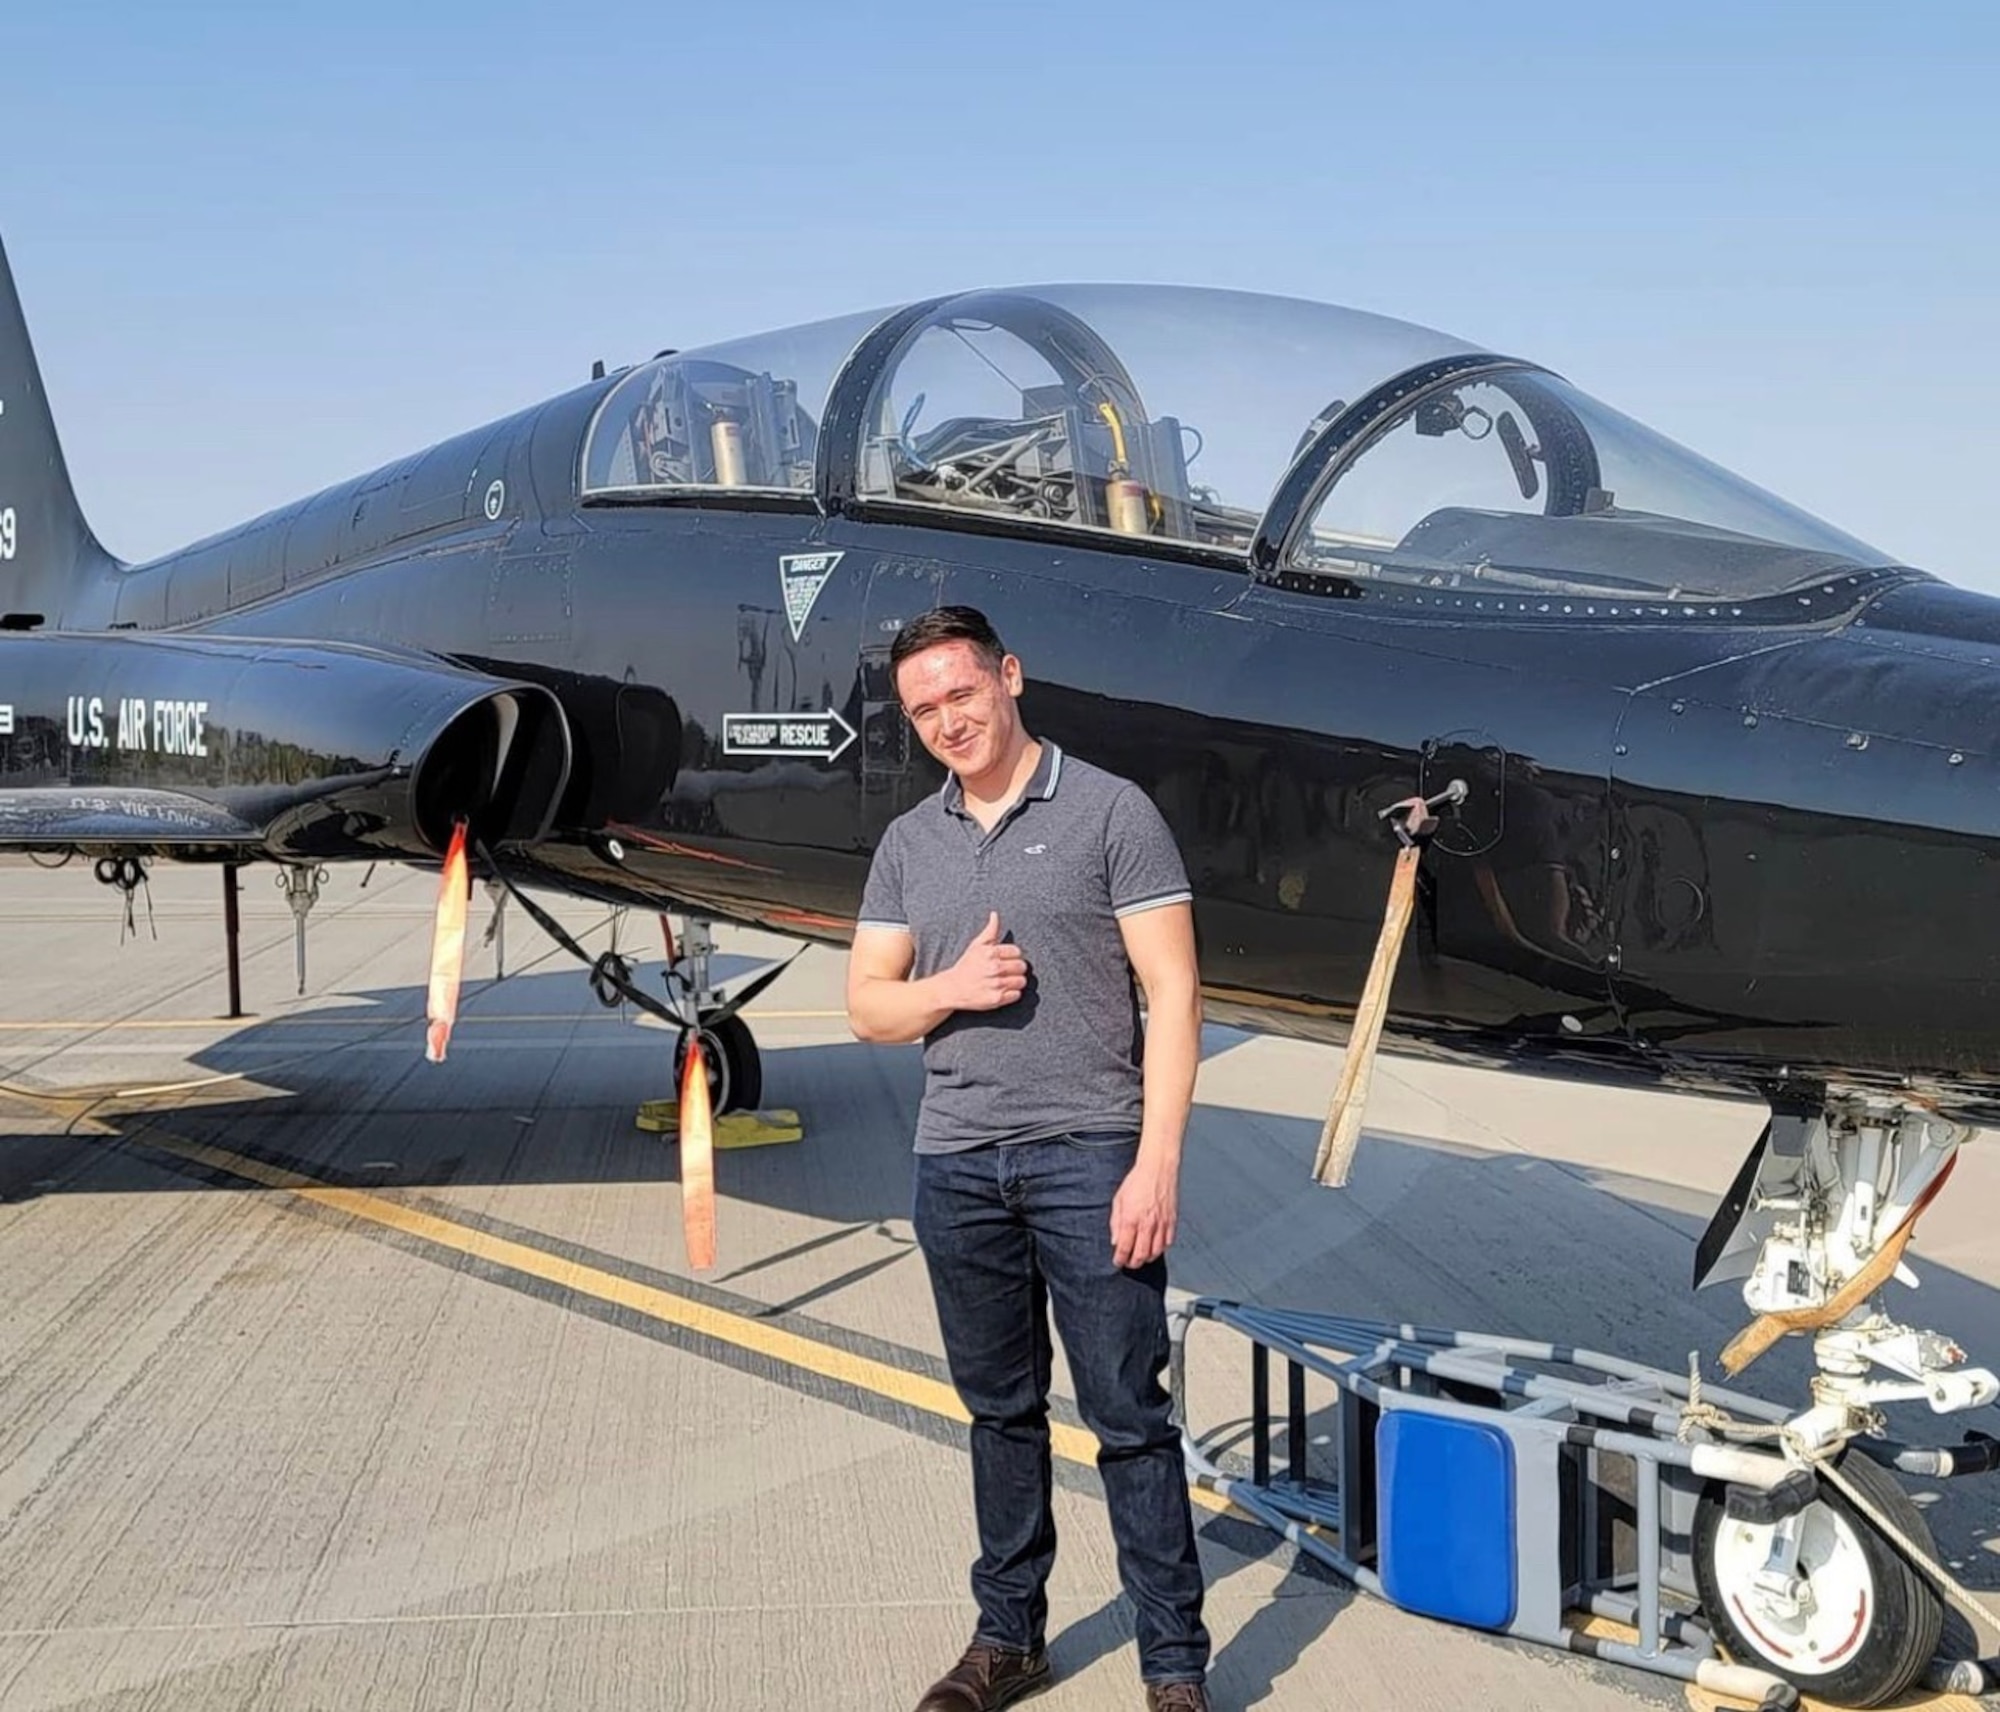 Jacob Moreno, a senior at the University of Texas at El Paso, stands in front of a T-38A Talon at Holloman Air Force Base, N.M., Aug. 20, 2021. Moreno interned with the 586th Flight Test Squadron over the summer, and during his internship coded a program that automatically deciphers airspace data for White Sands Missile Range into a format that aircrews can view while in flight. (U.S. Air Force Photo)